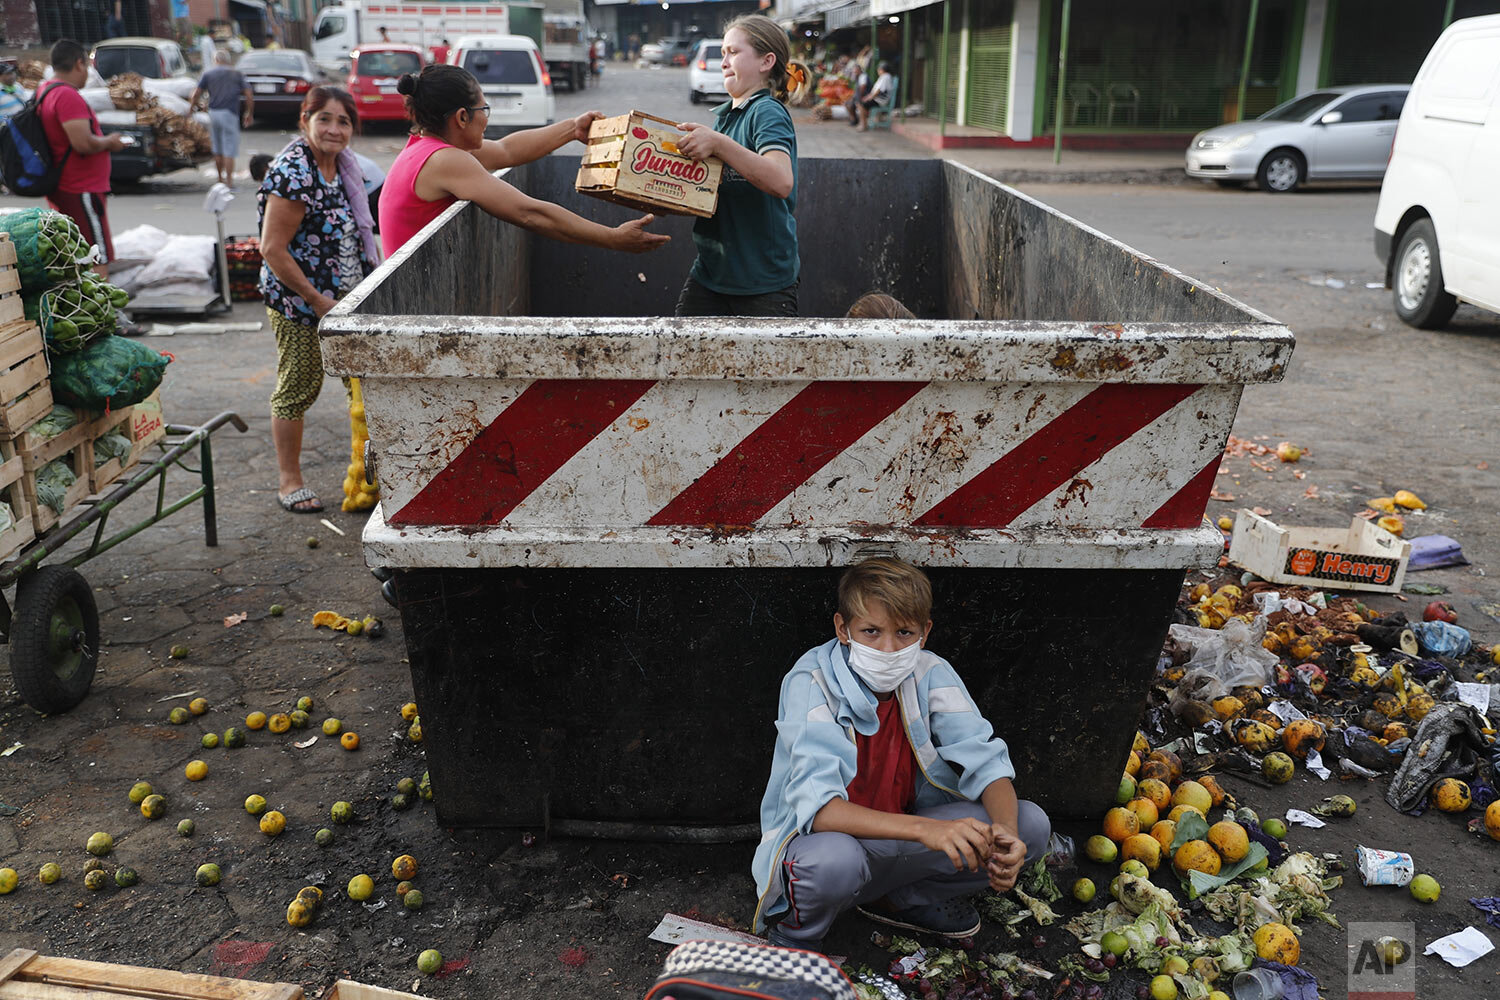  Fabian Ramirez, 11, scavenges a trash container for vegetables with his family at the "Mercado de Abasto," a market for vendors, during the fourth week of a quarantine to help contain the spread of the new coronavirus in Asuncion, Paraguay, Thursday